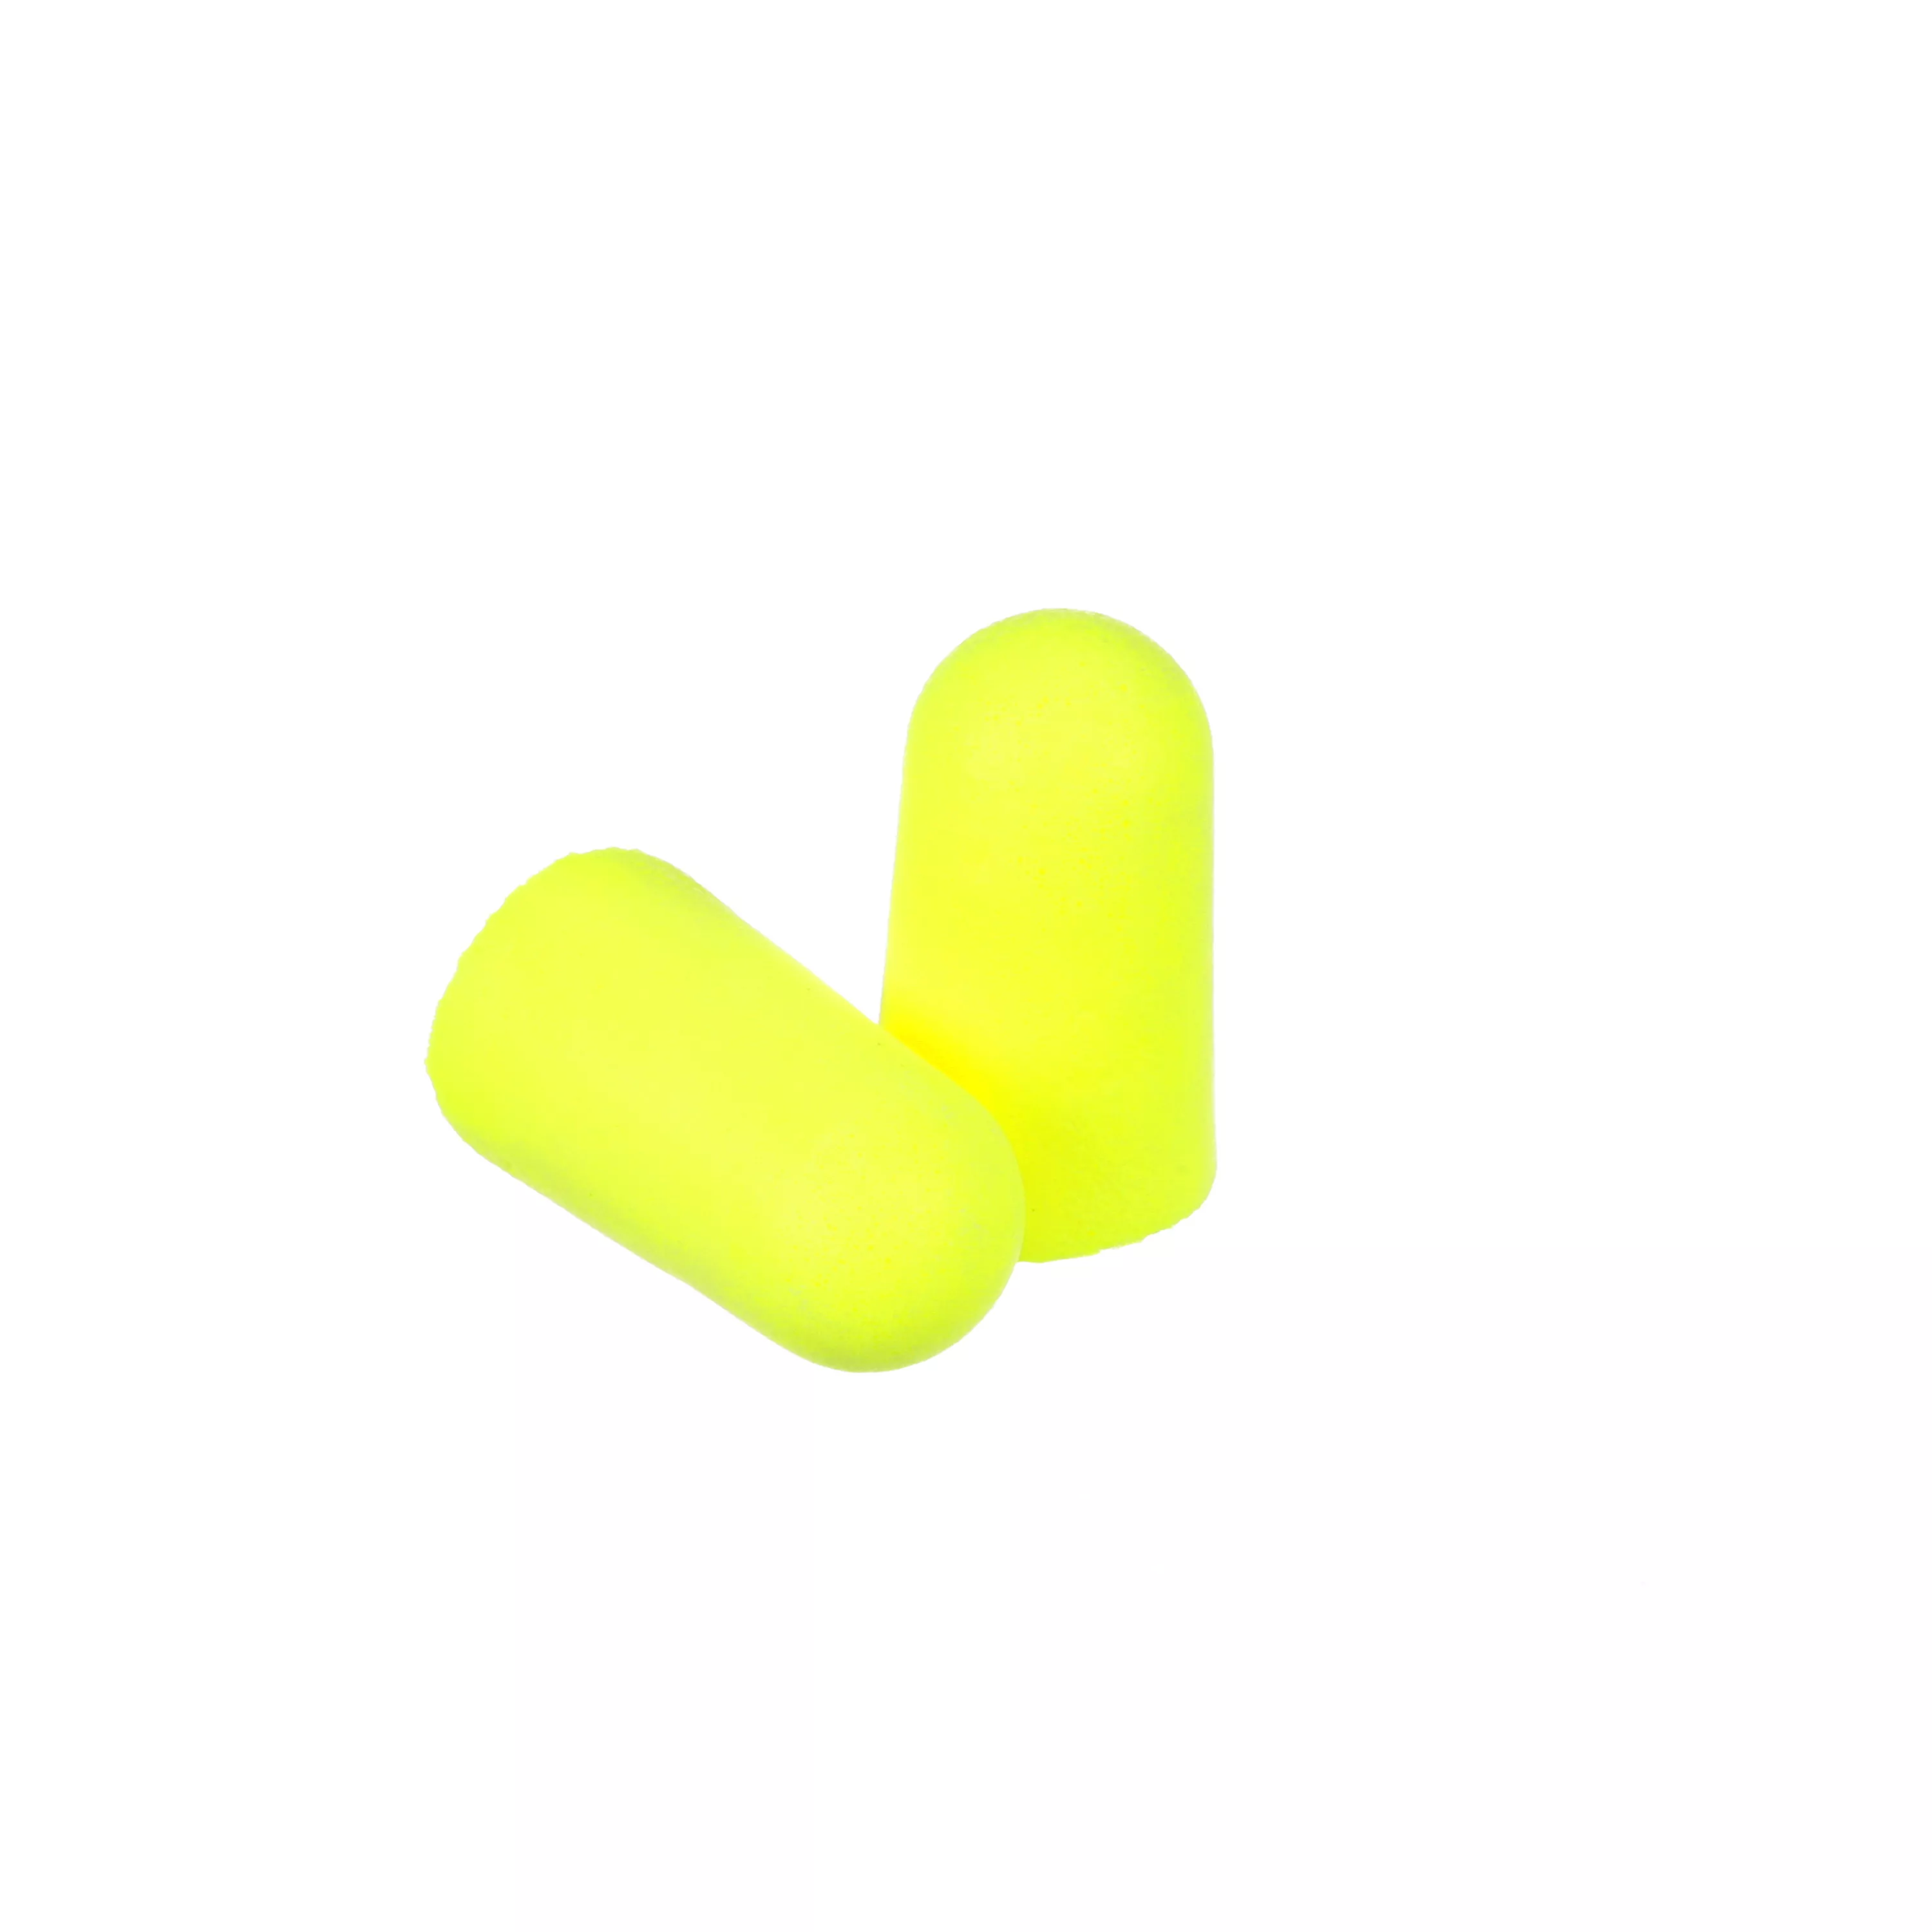 3M™ E-A-Rsoft™ Yellow Neons™ Earplugs 312-1251, Uncorded, Poly Bag,
Large Size, 2000 Pair/Case